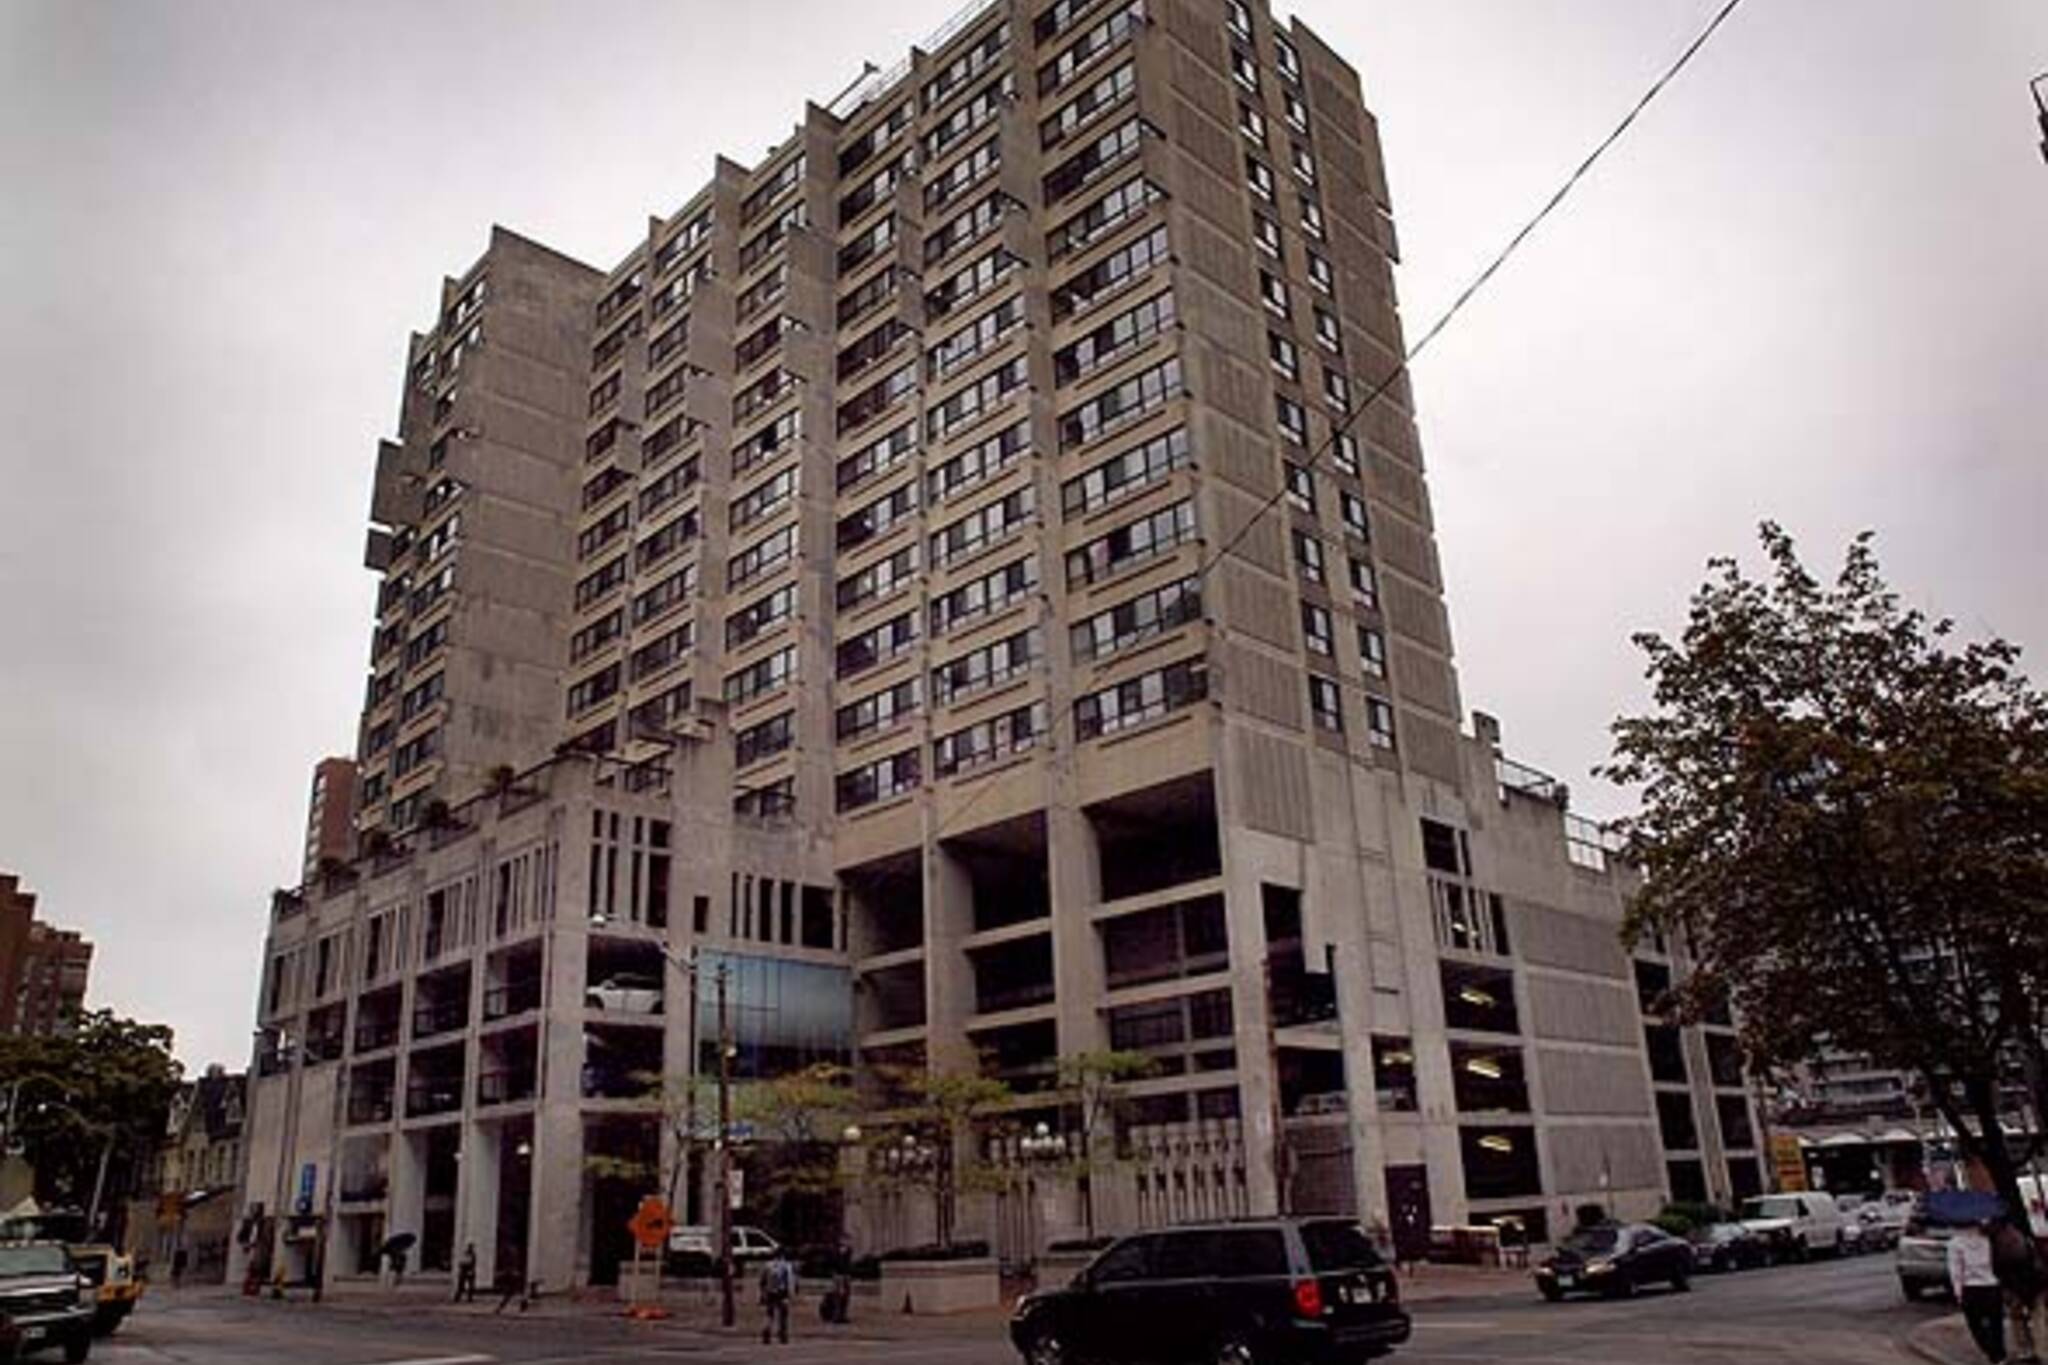 Ugliest Place in Toronto